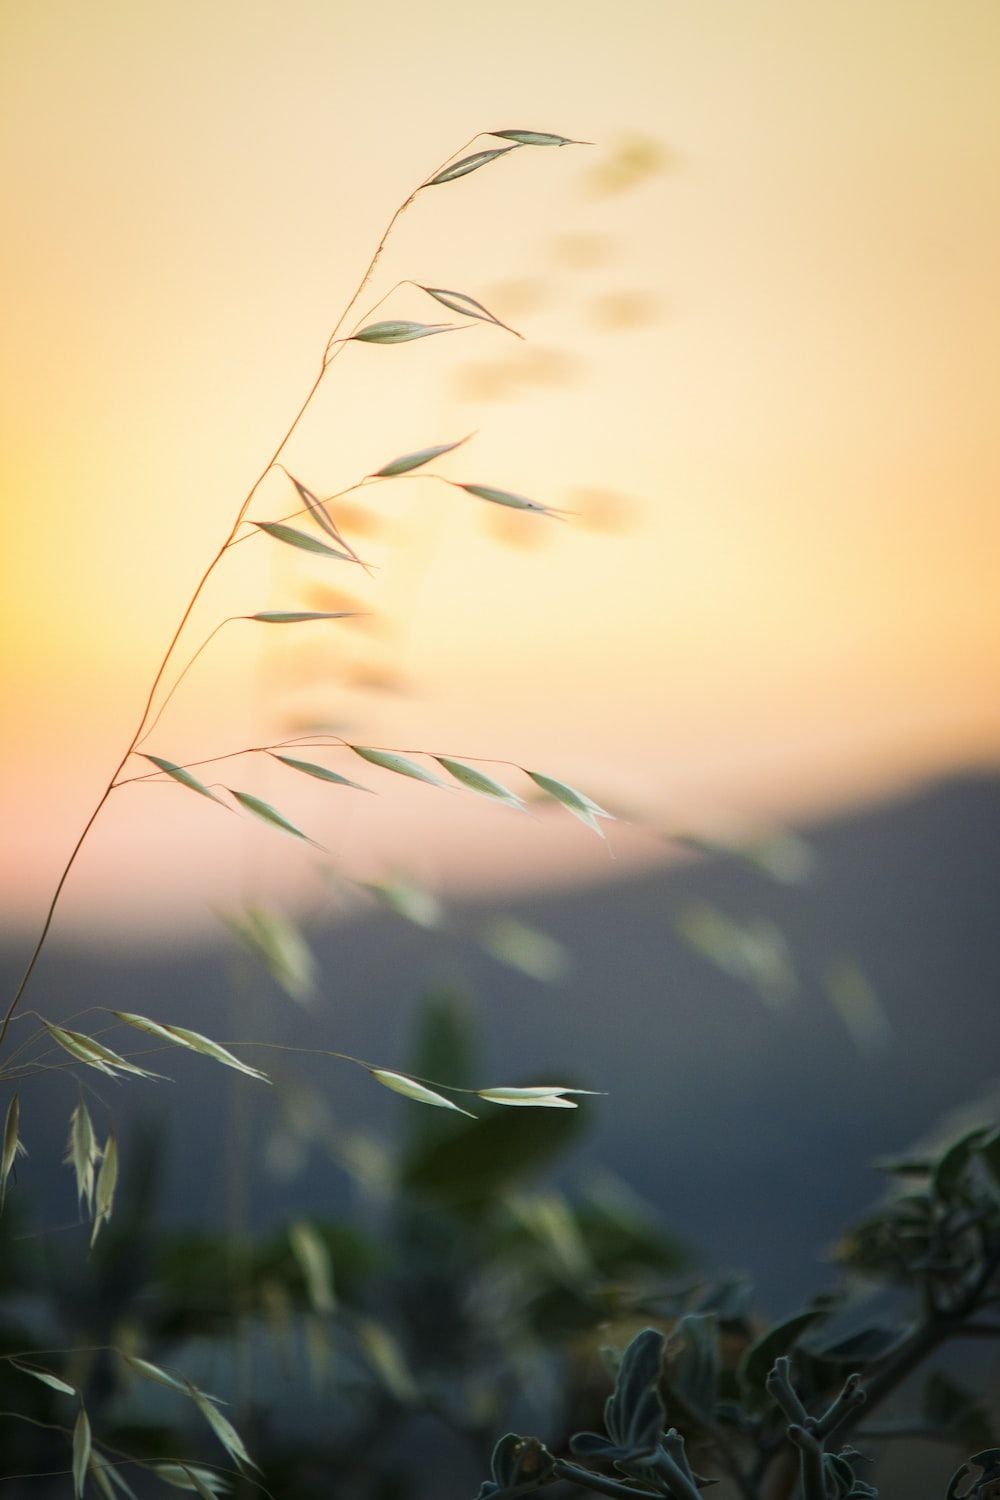 A grassy plant in the foreground with a sunset in the background - Calming